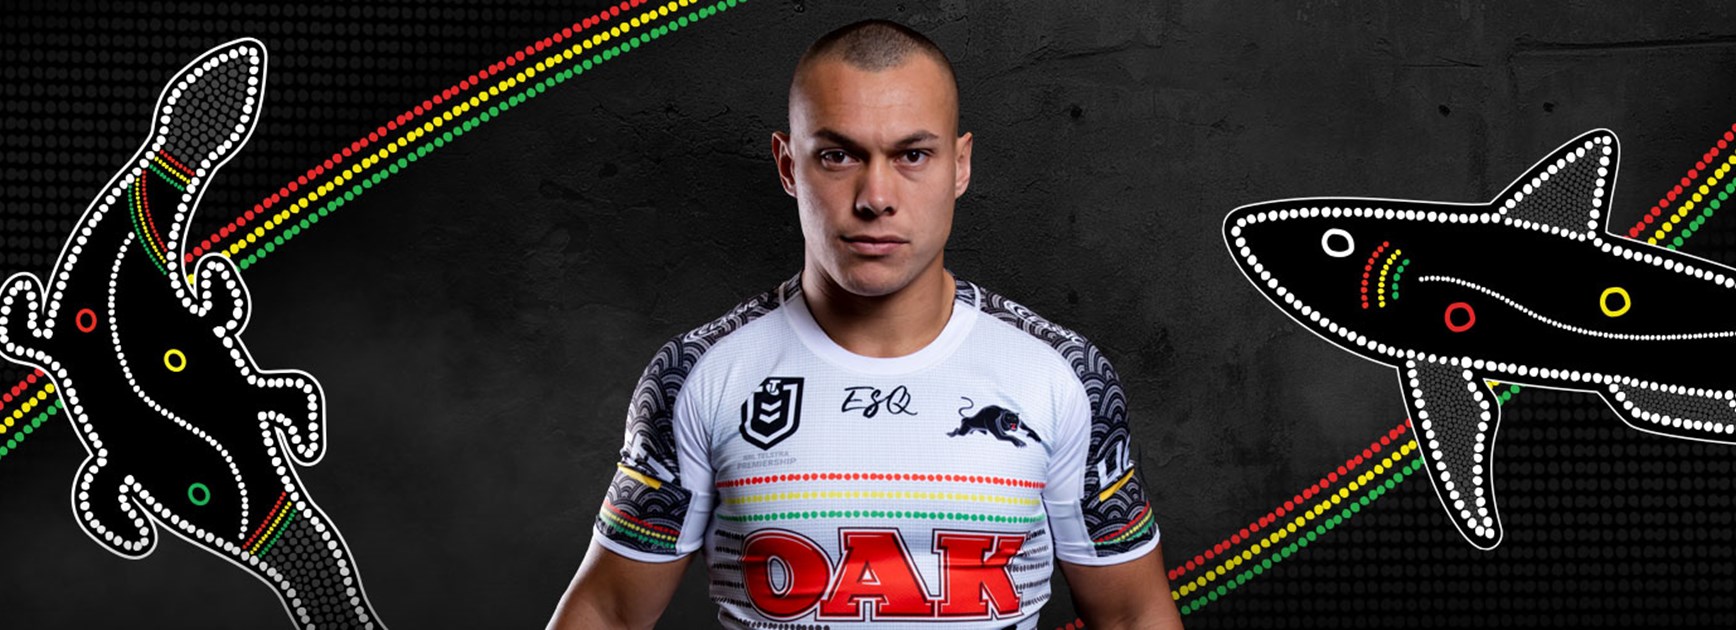 2019 Panthers Indigenous Jersey revealed